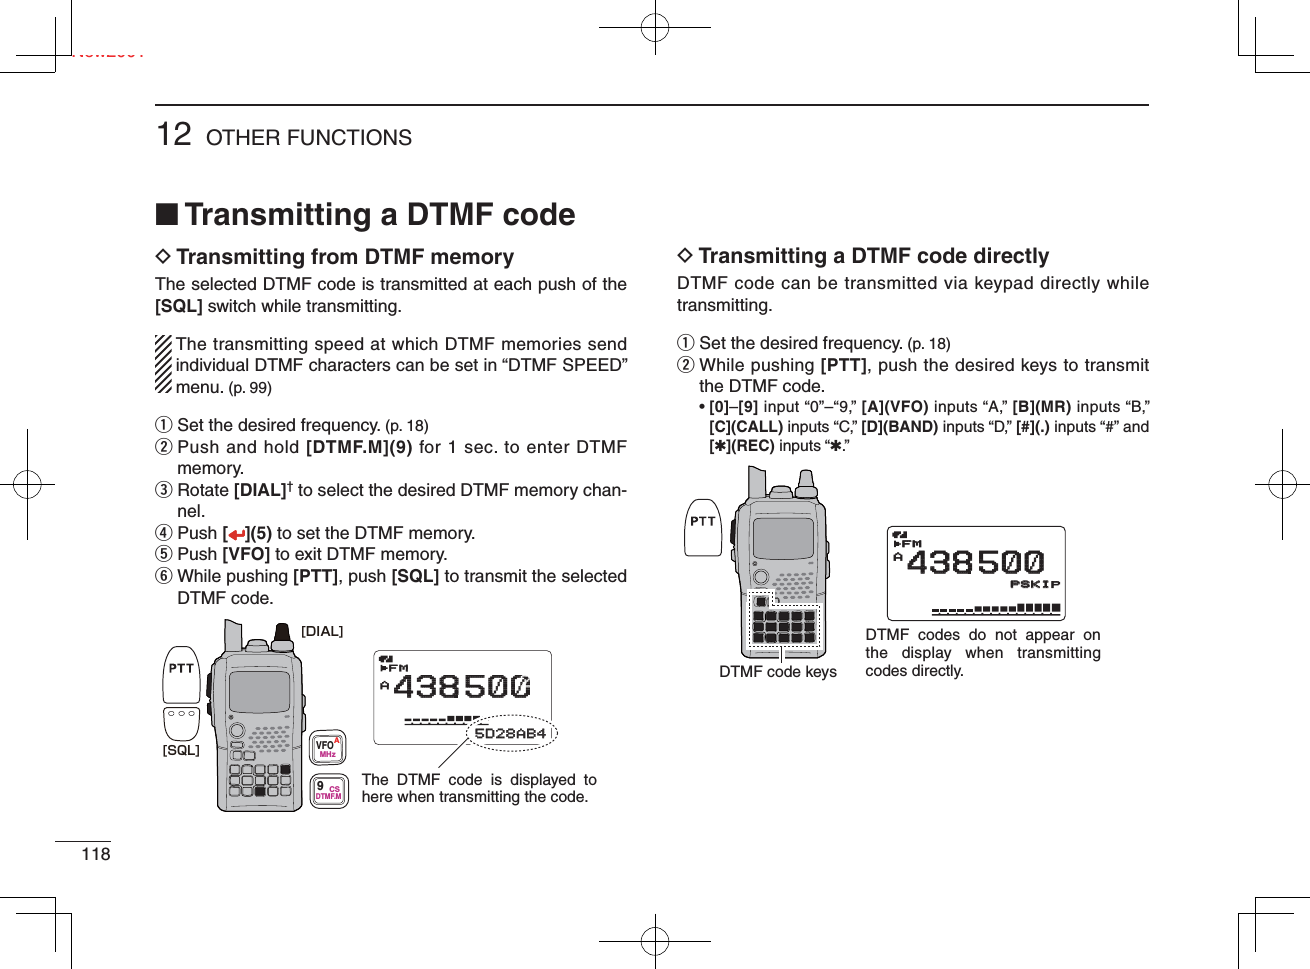 11812 OTHER FUNCTIONSNew2001■ Transmitting a DTMF codeD  Transmitting from DTMF memoryThe selected DTMF code is transmitted at each push of the [SQL] switch while transmitting.  The transmitting speed at which DTMF memories send individual DTMF characters can be set in “DTMF SPEED” menu. (p. 99)q Set the desired frequency. (p. 18)w  Push and hold [DTMF.M](9) for 1 sec. to enter DTMF memory.e  Rotate [DIAL]† to select the desired DTMF memory chan-nel.r Push [](5) to set the DTMF memory.t Push [VFO] to exit DTMF memory.y  While pushing [PTT], push [SQL] to transmit the selected DTMF code.D  Transmitting a DTMF code directlyDTMF code can be transmitted via keypad directly while transmitting.q Set the desired frequency. (p. 18)w  While pushing [PTT], push the desired keys to transmit the DTMF code. •  [0]–[9] input “0”–“9,” [A](VFO) inputs “A,” [B](MR) inputs “B,” [C](CALL) inputs “C,” [D](BAND) inputs “D,” [#](.) inputs “#” and [✱](REC) inputs “✱.”MemoNameMemoNamePRIOPRIO WX EMREMRDTCSDTCSFMA438500PSKIPPSKIP+DUP+DUP2525μ0000005D28AB45D28AB4The DTMF code is displayed to here when transmitting the code.AFM438500PSKIP[SQL][DIAL]VFOMHzA9DTMF.MCSMemoNamePRIO WX EMRDTCSFMA438500PSKIP+DUP25μ0005D28AB4DTMF codes do not appear on the display when transmitting codes directly.AFMFM438500PSKIPSKIPDTMF code keys